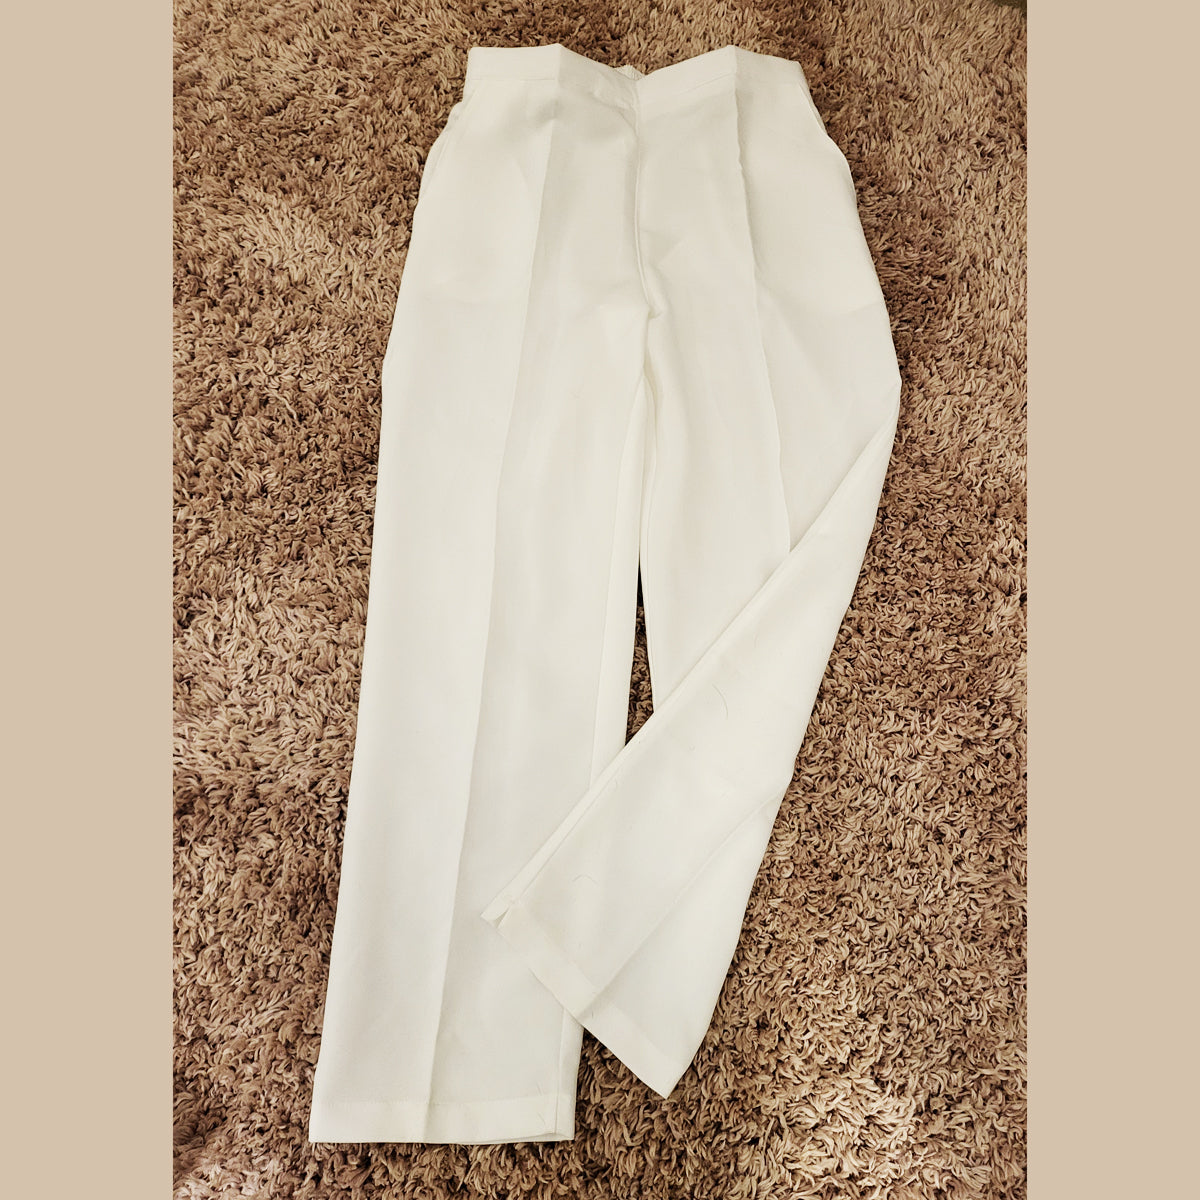 Straight Leg Trousers 1/2 elastic waist and side pockets (27 INCH)